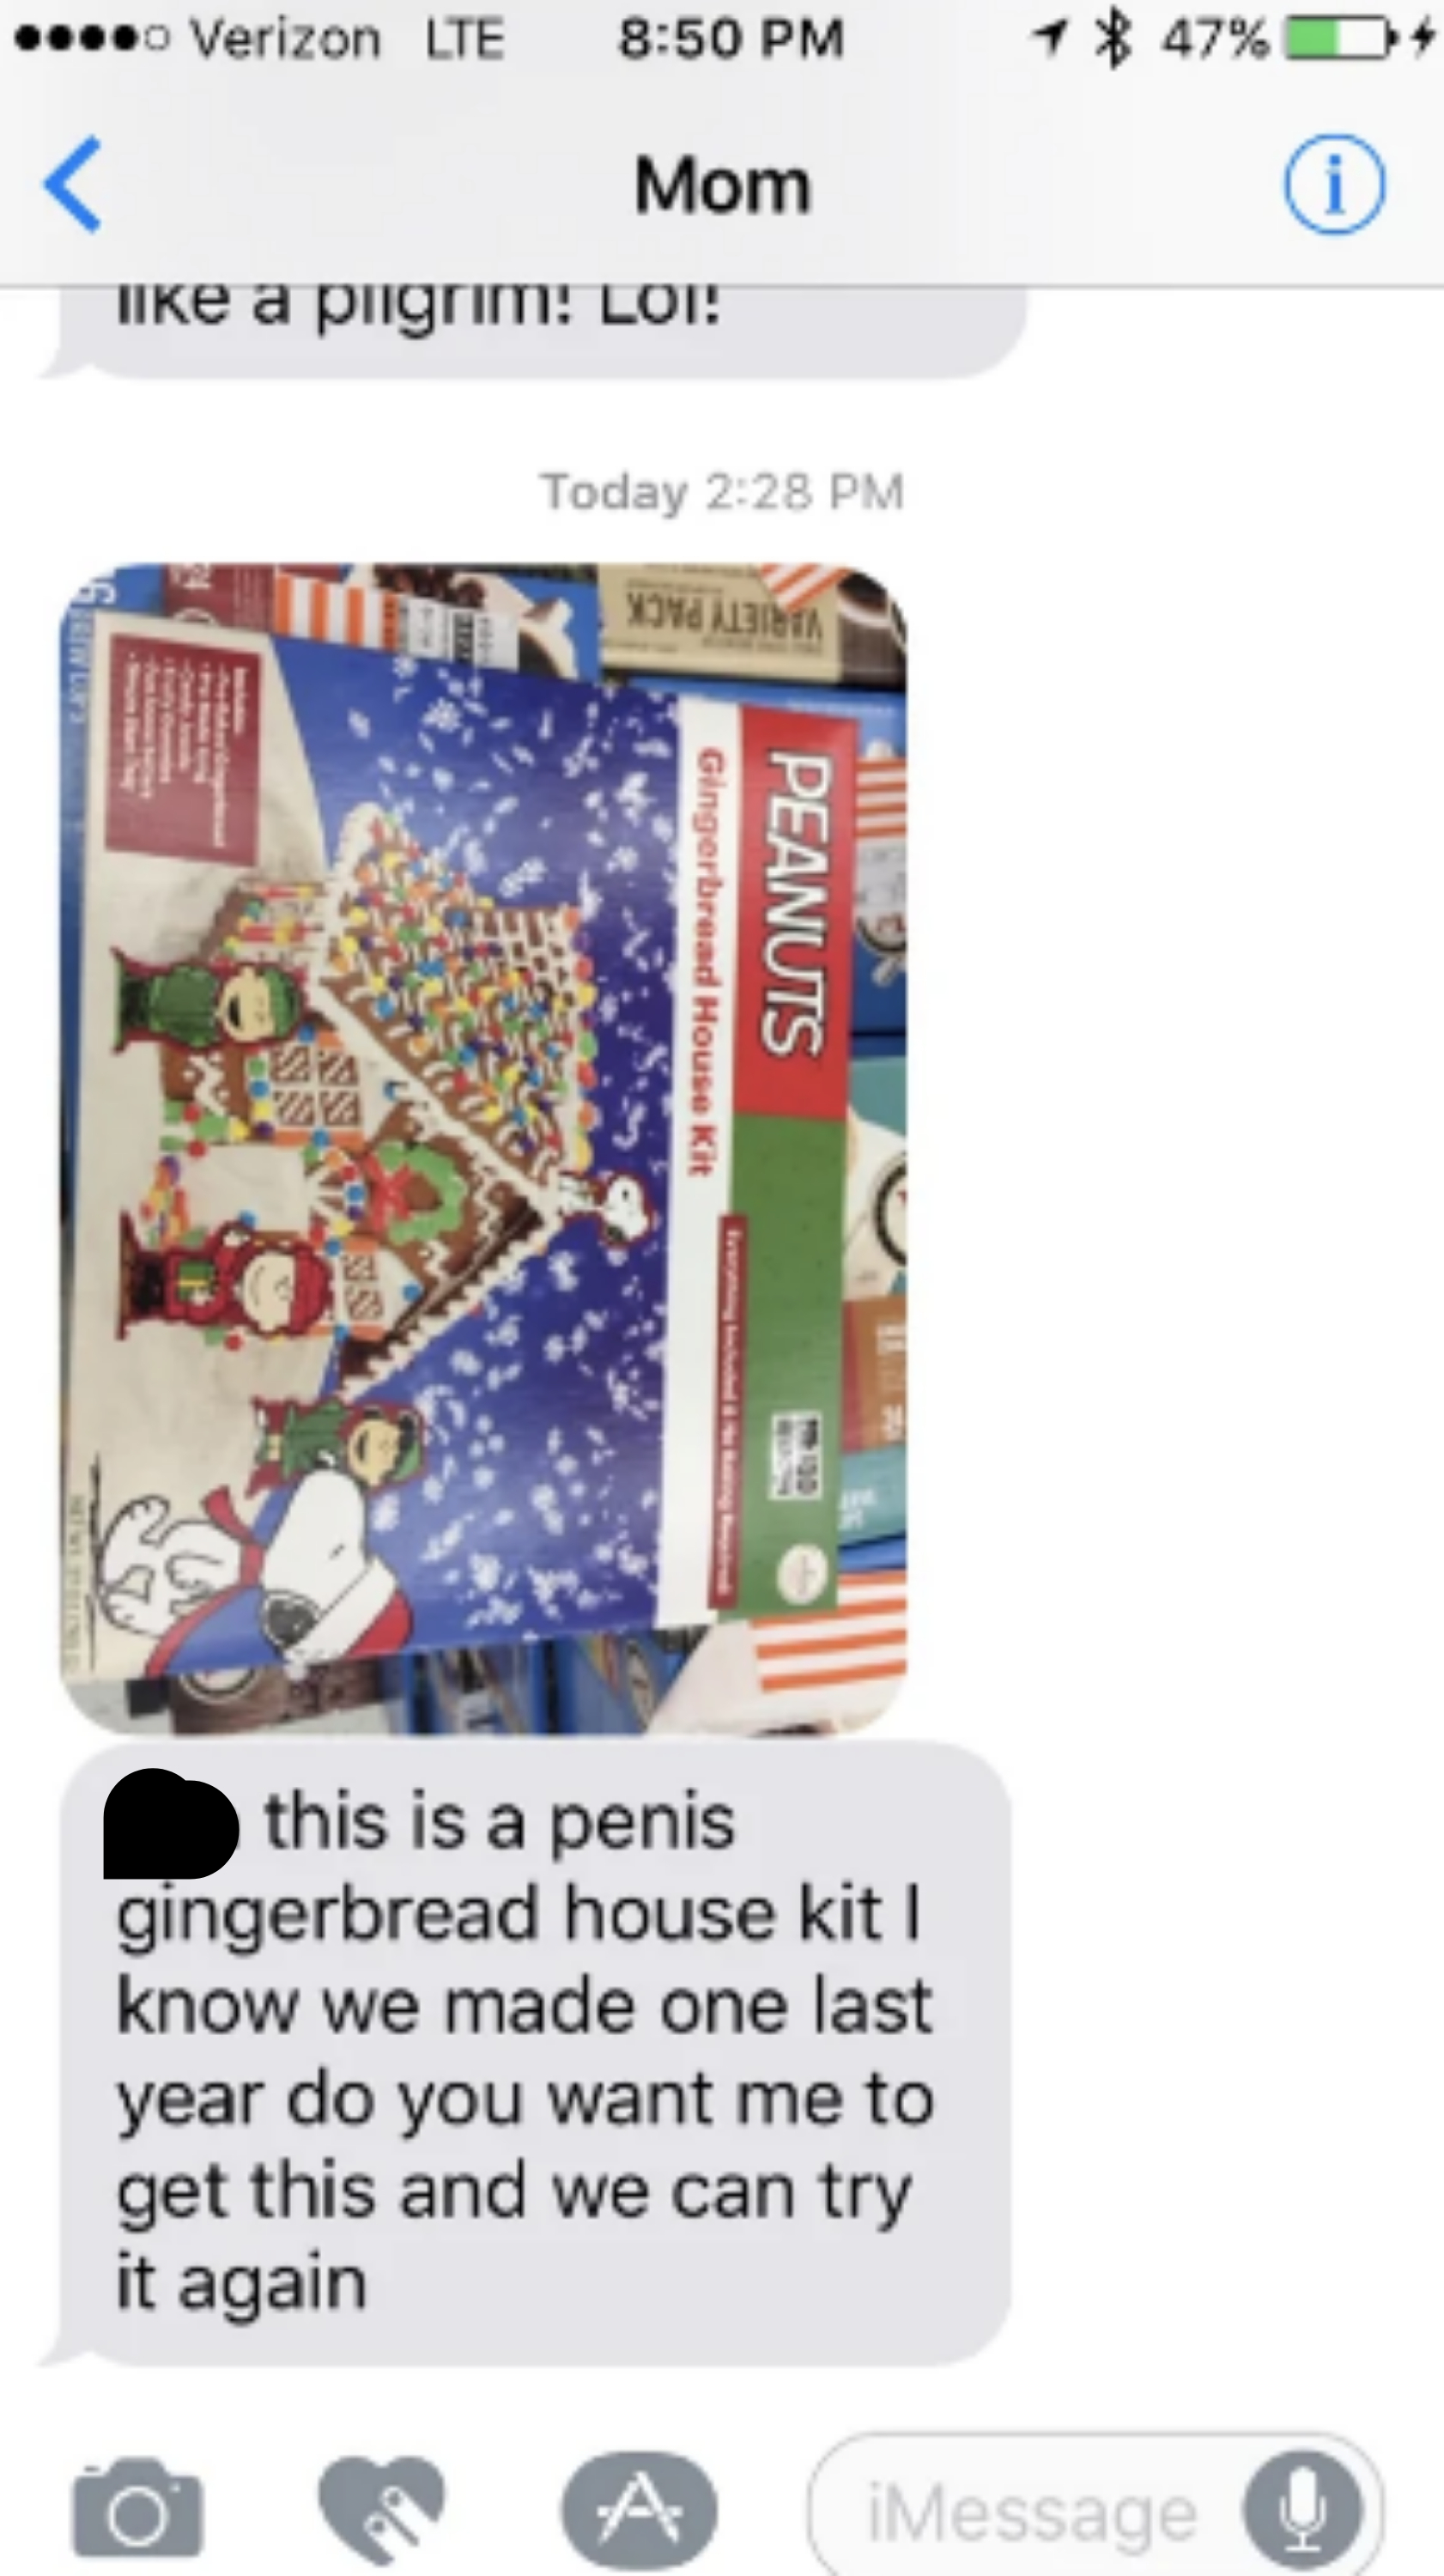 &quot;this is a penis gingerbread house kit&quot;